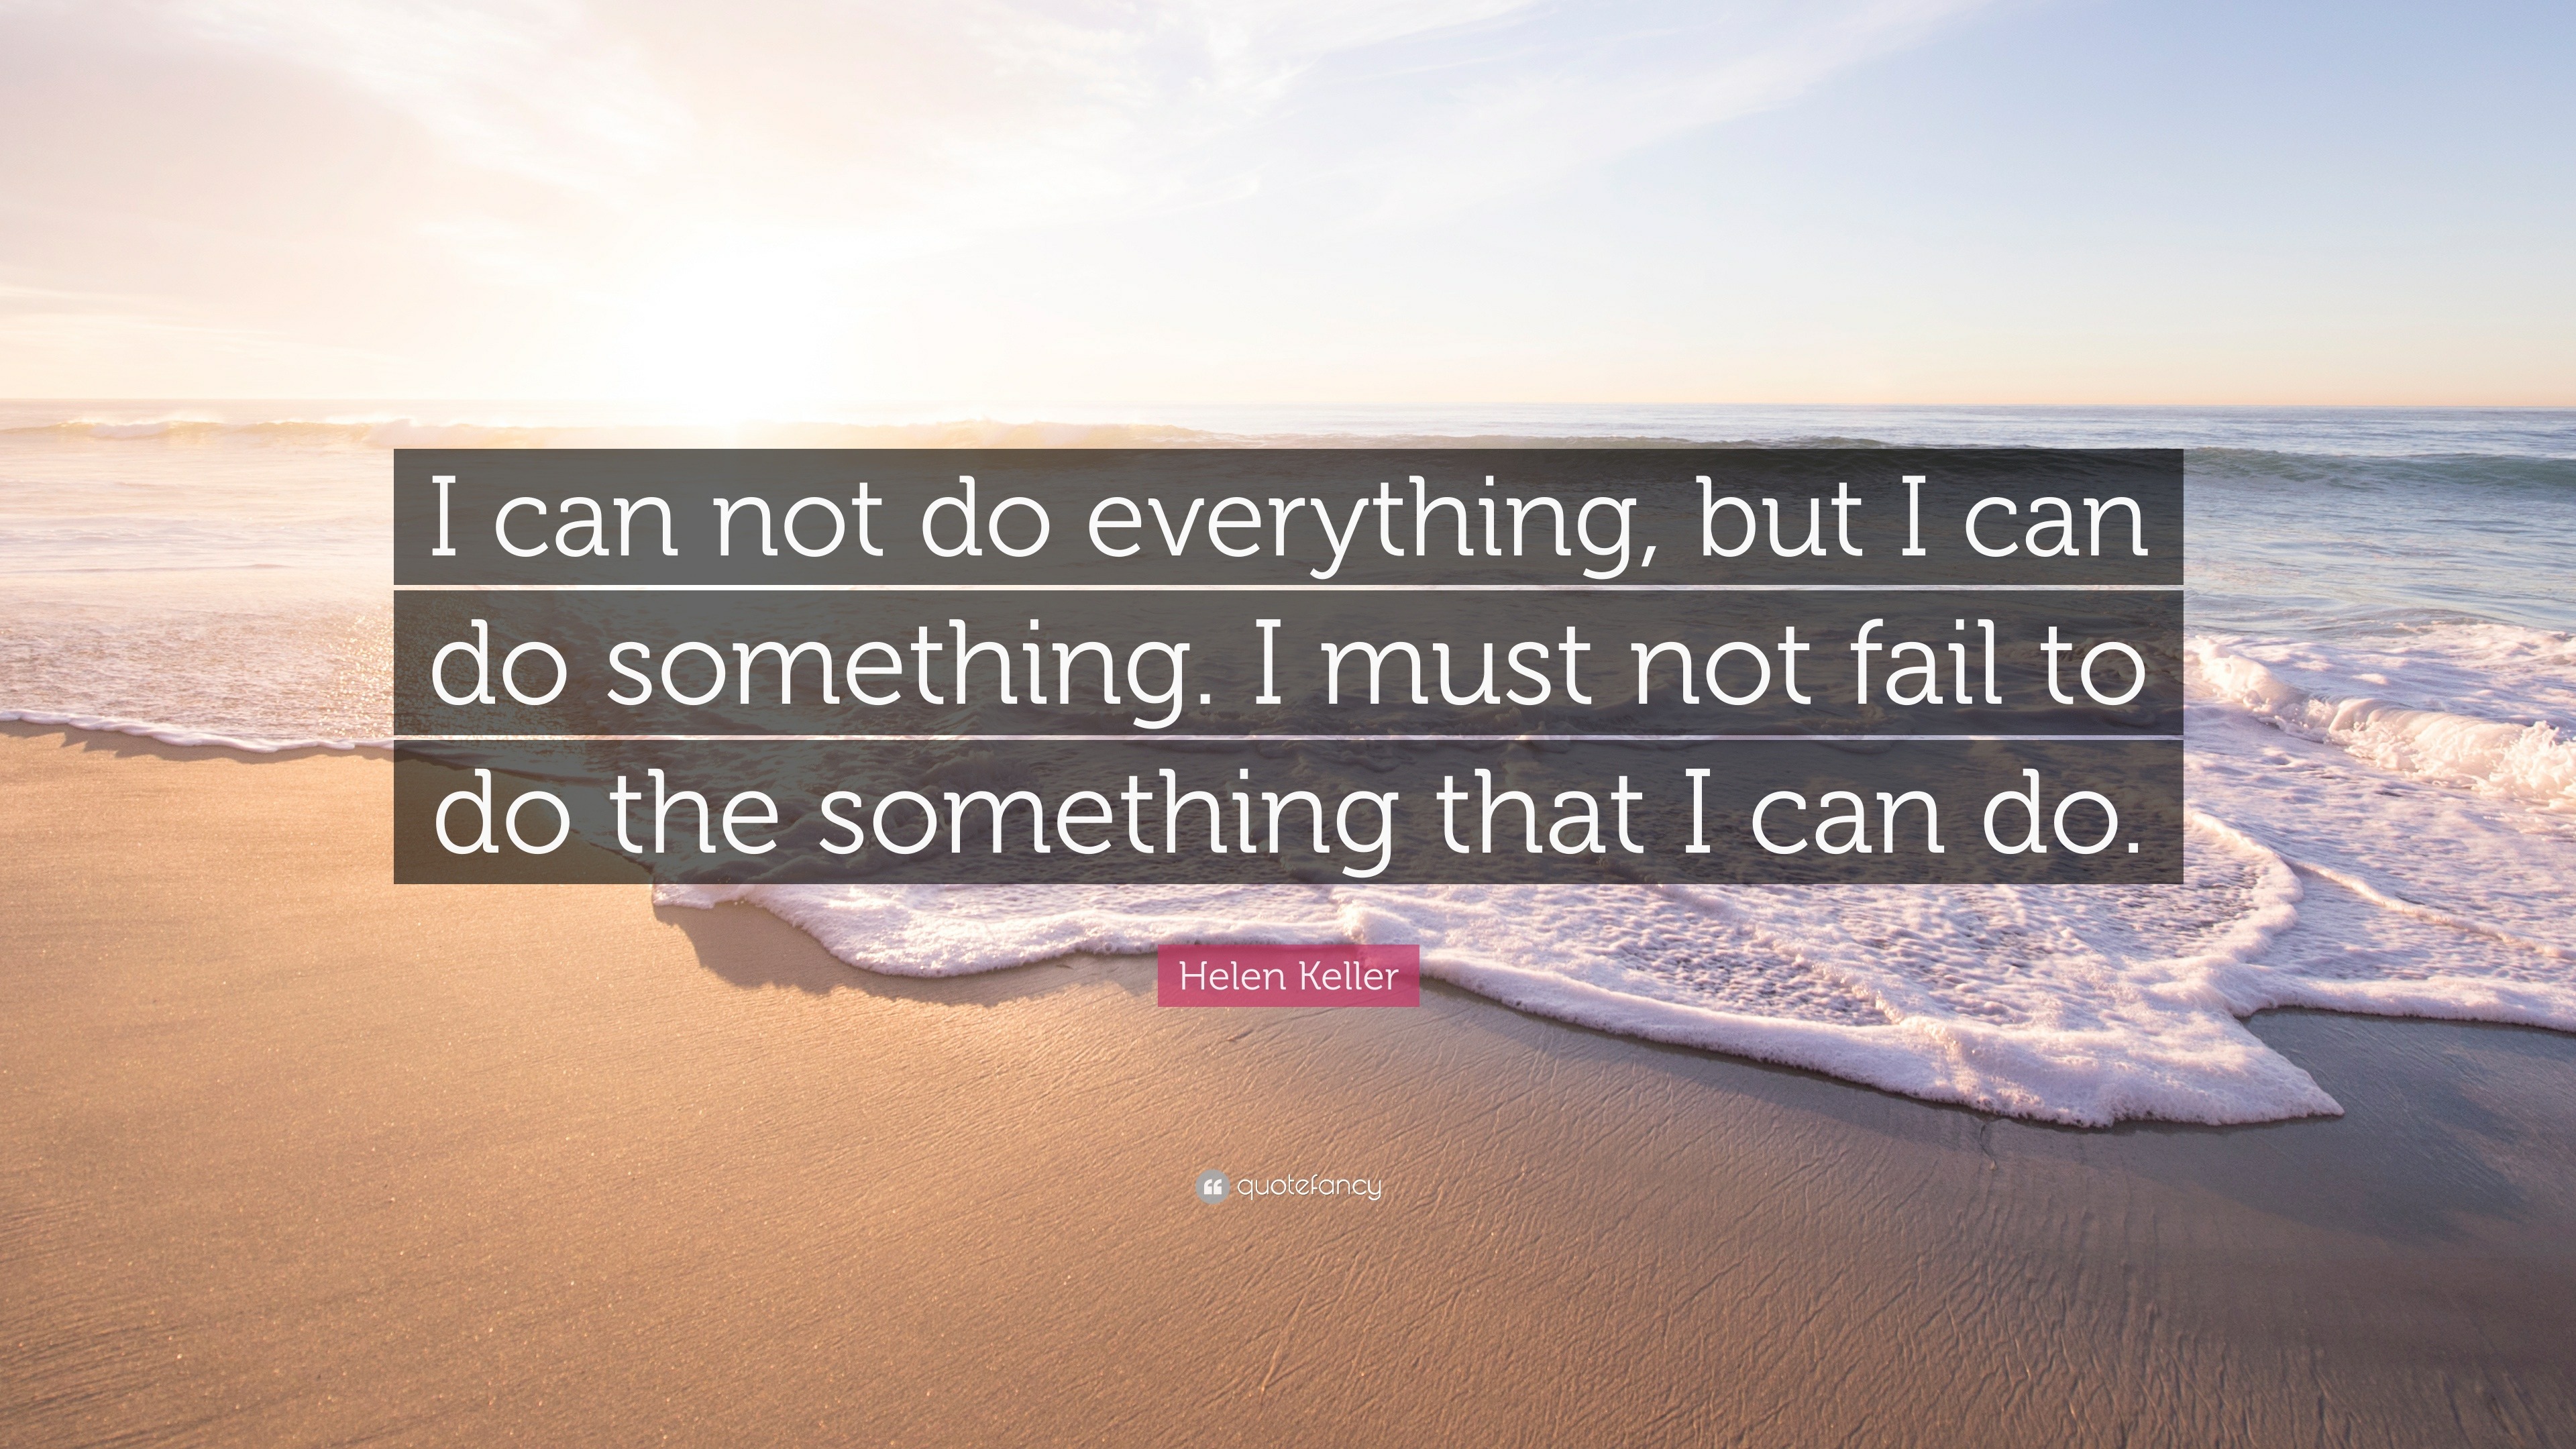 Helen Keller Quote: “I can not do everything, but I can do something. I ...